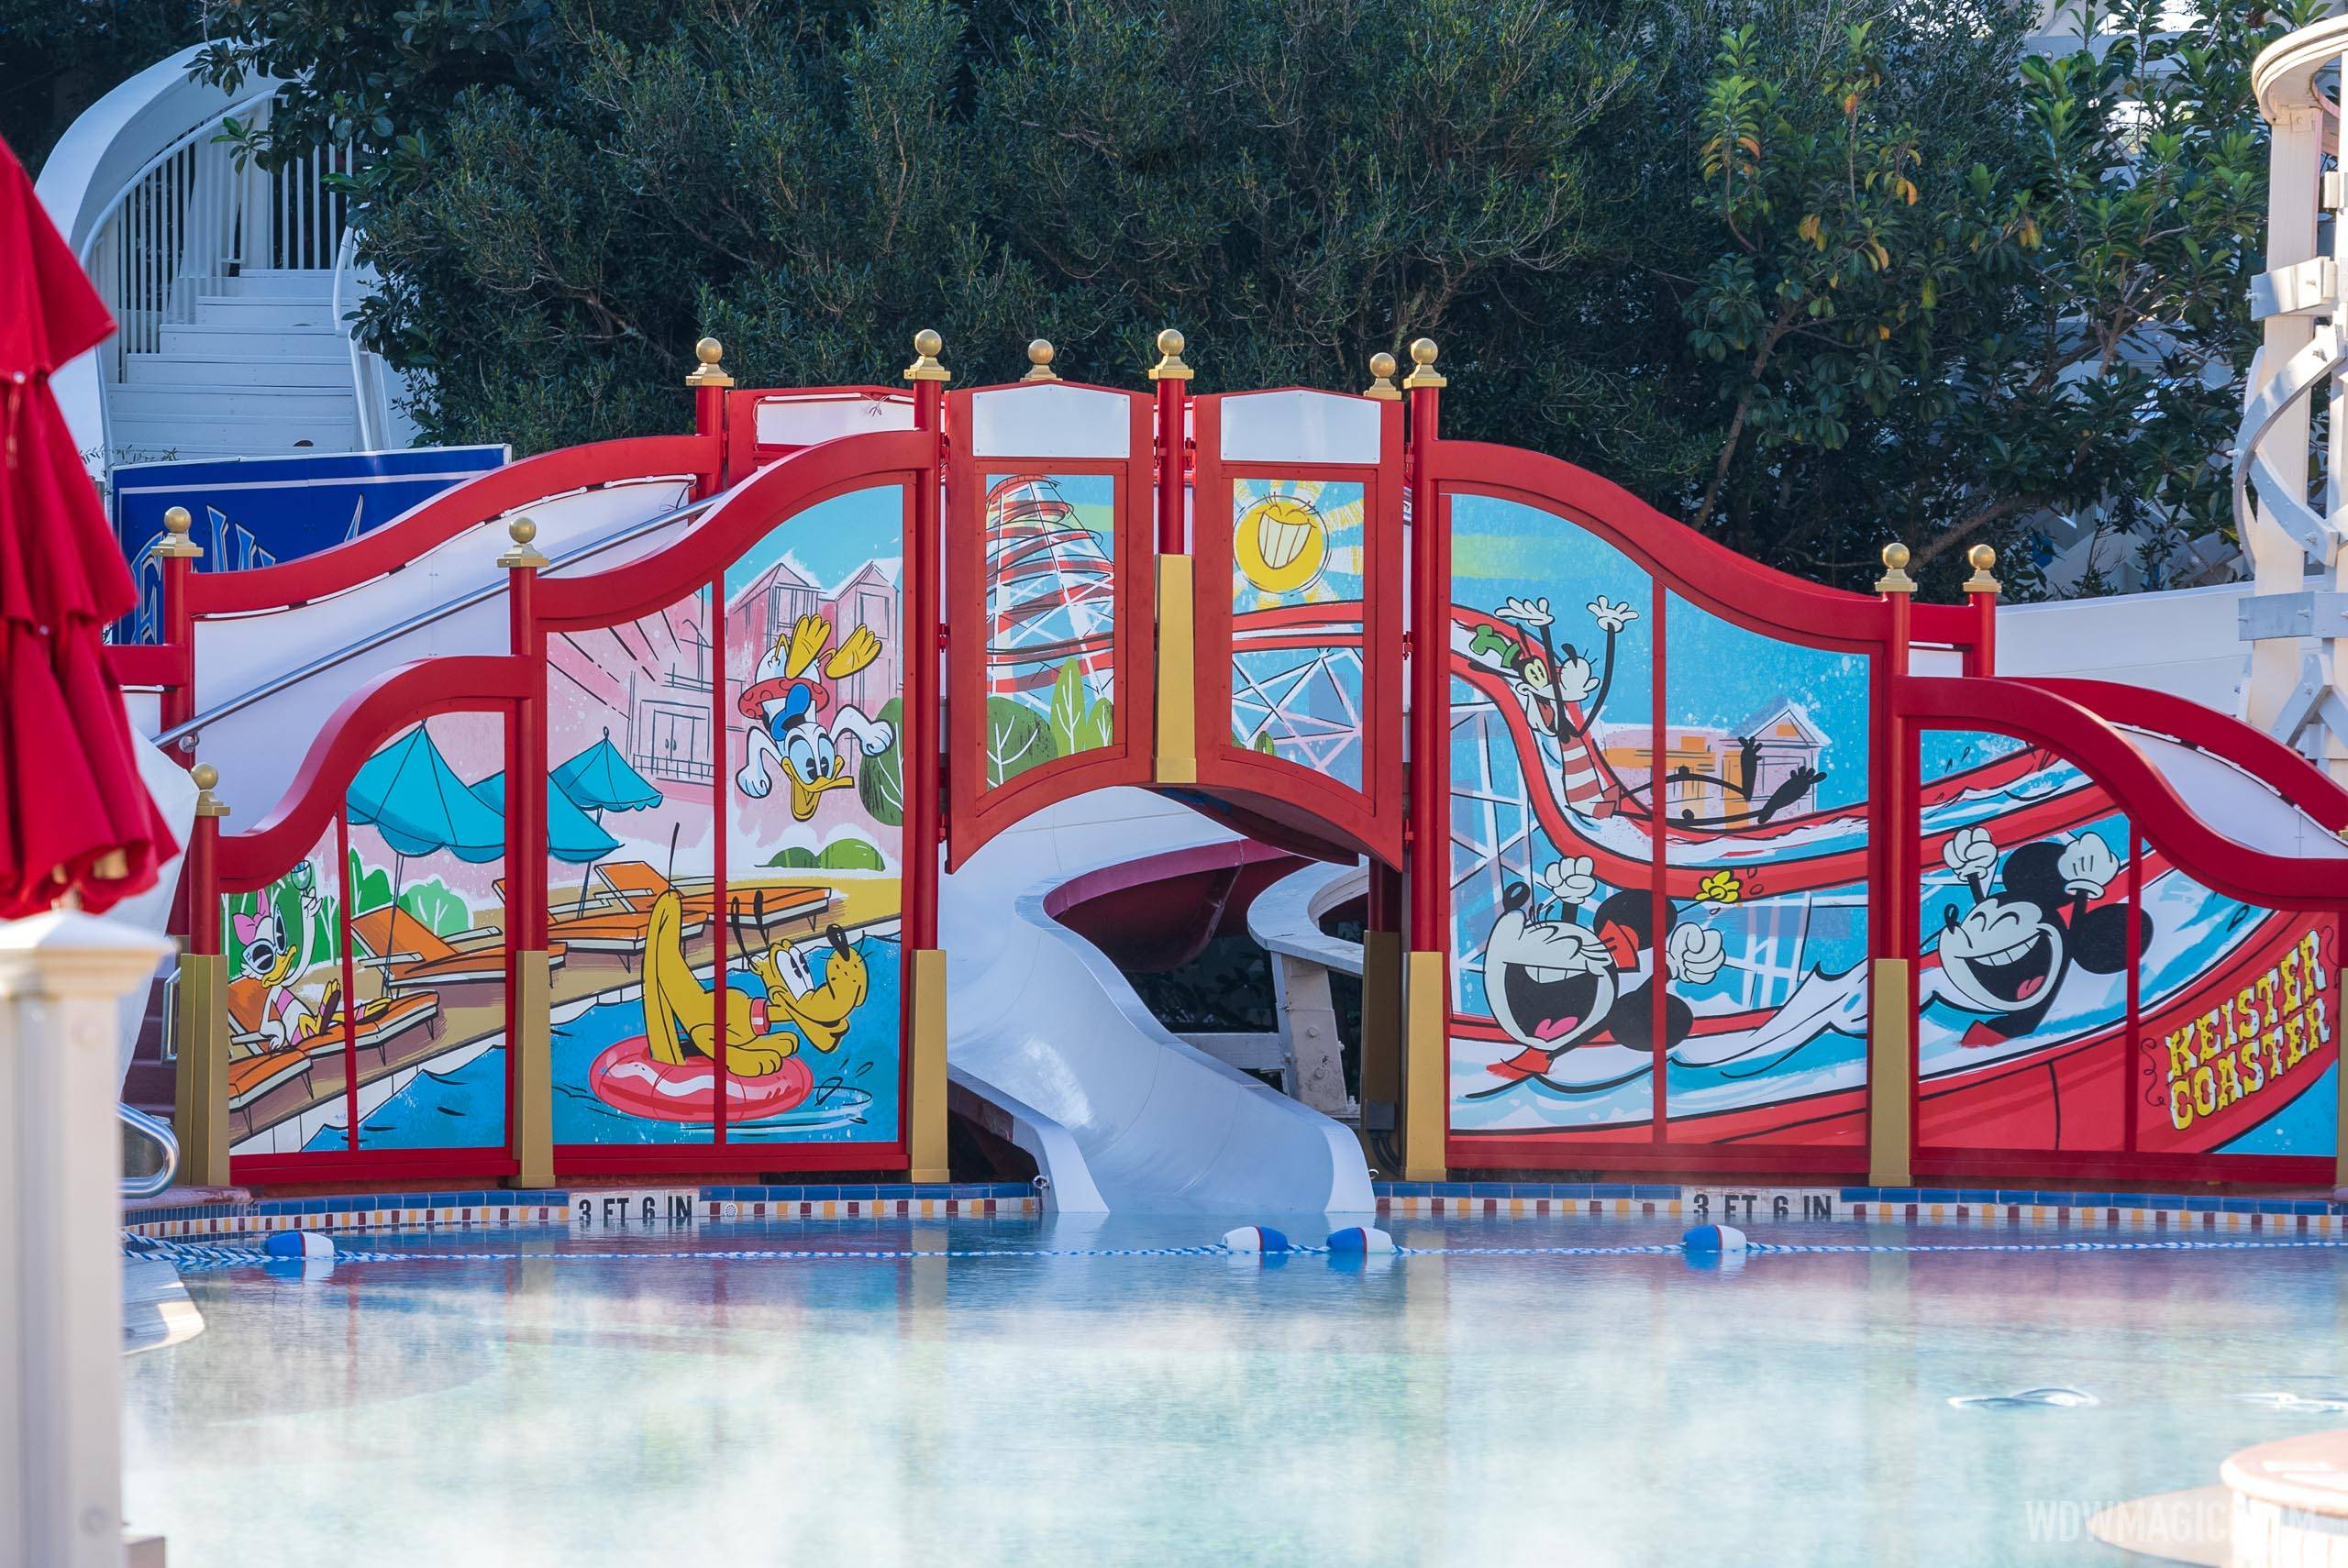 PHOTOS - Walls down at the new-look slide at the Boardwalk's Luna Park pool